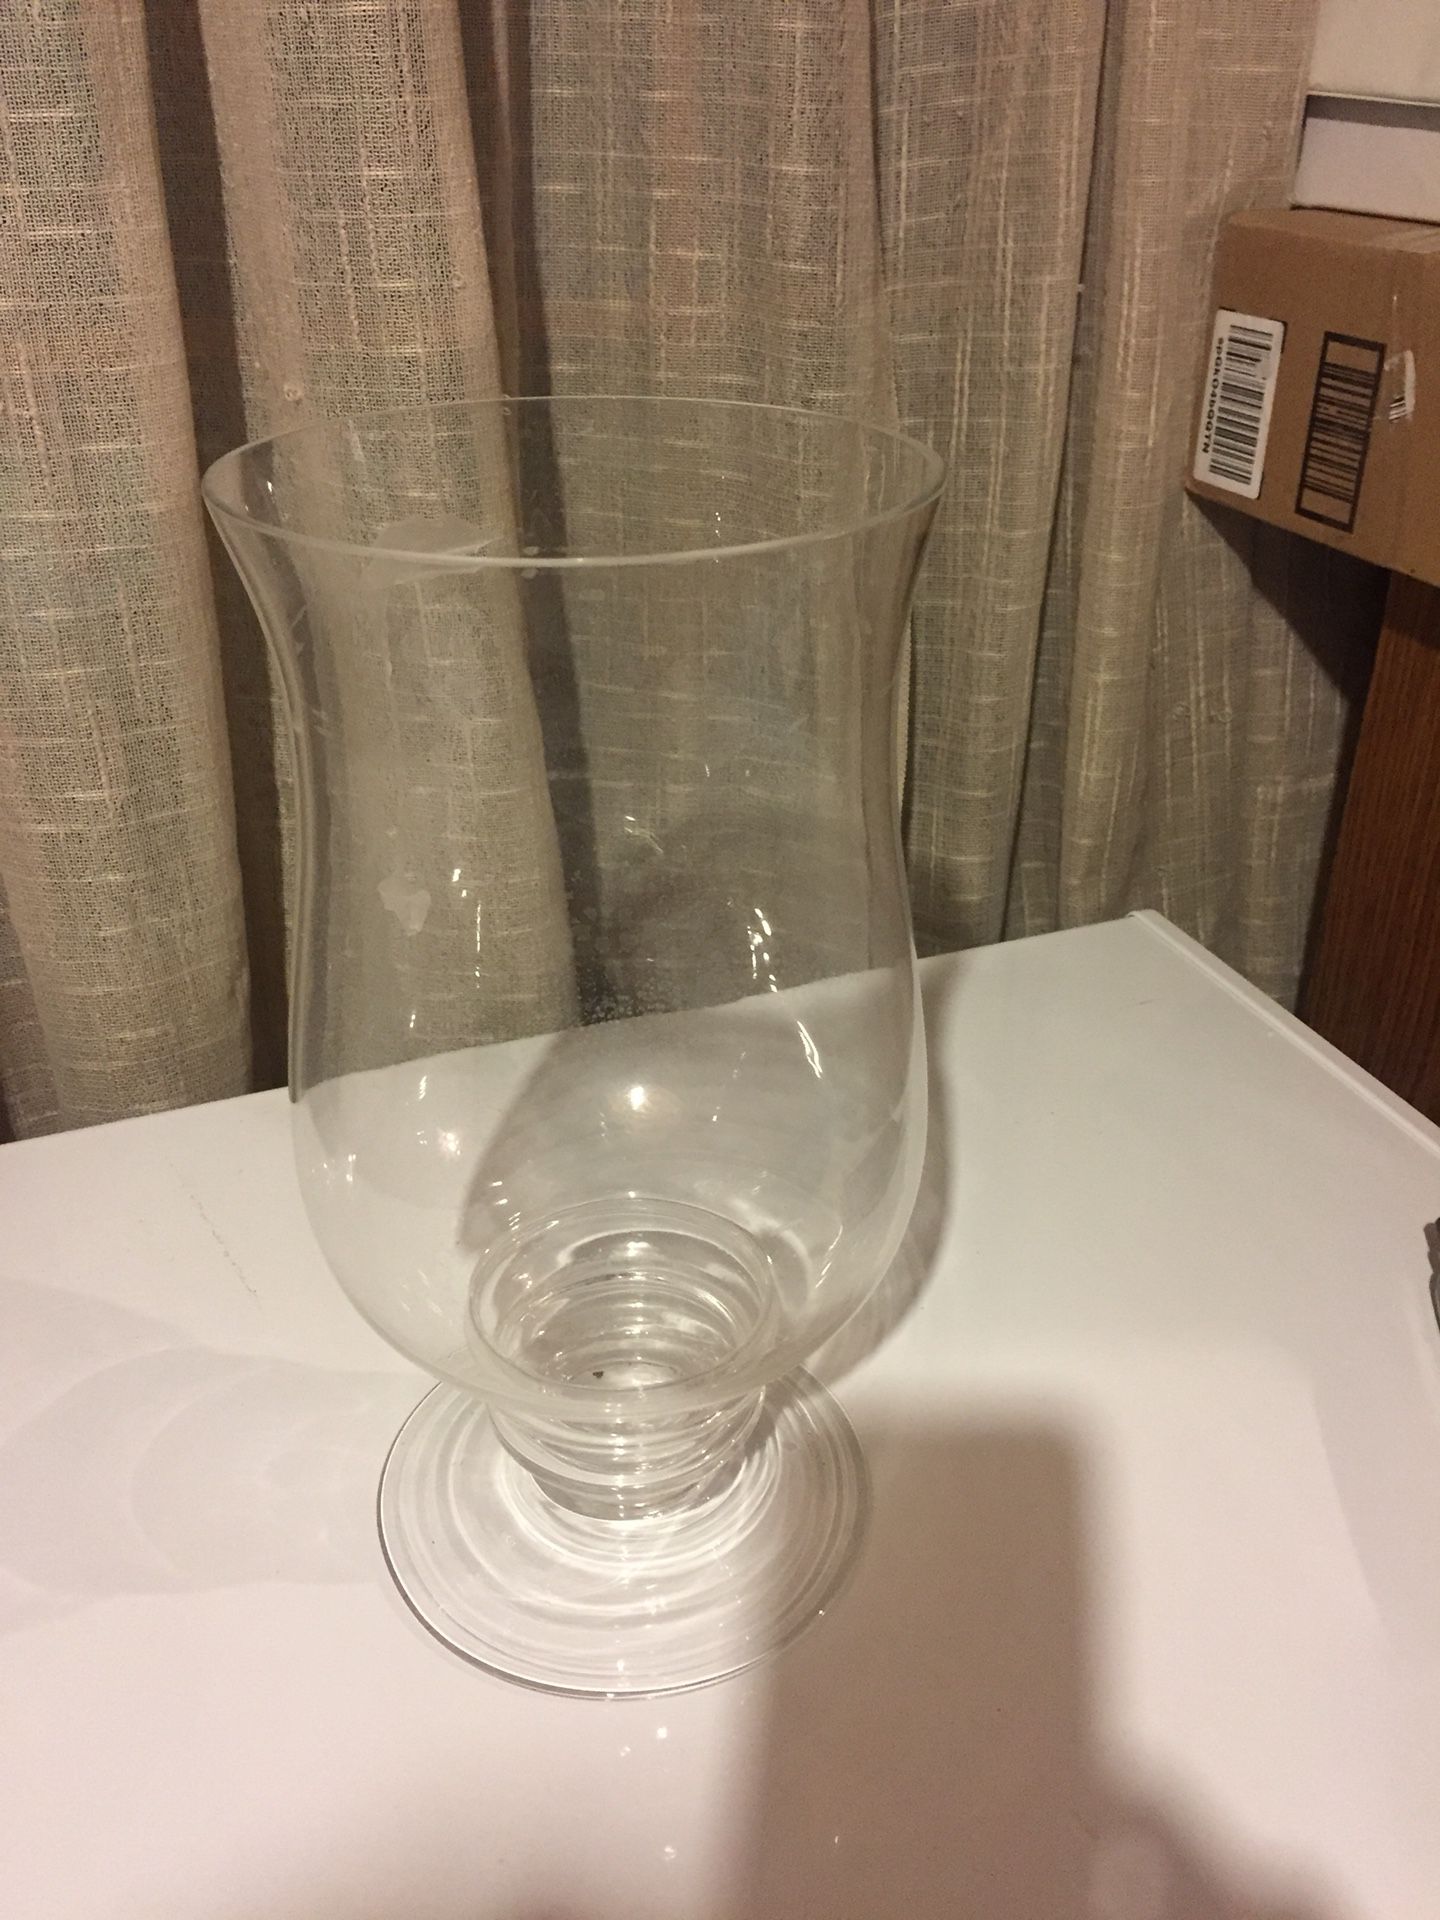 Hurricane vase/ candle holders 12 inches tall